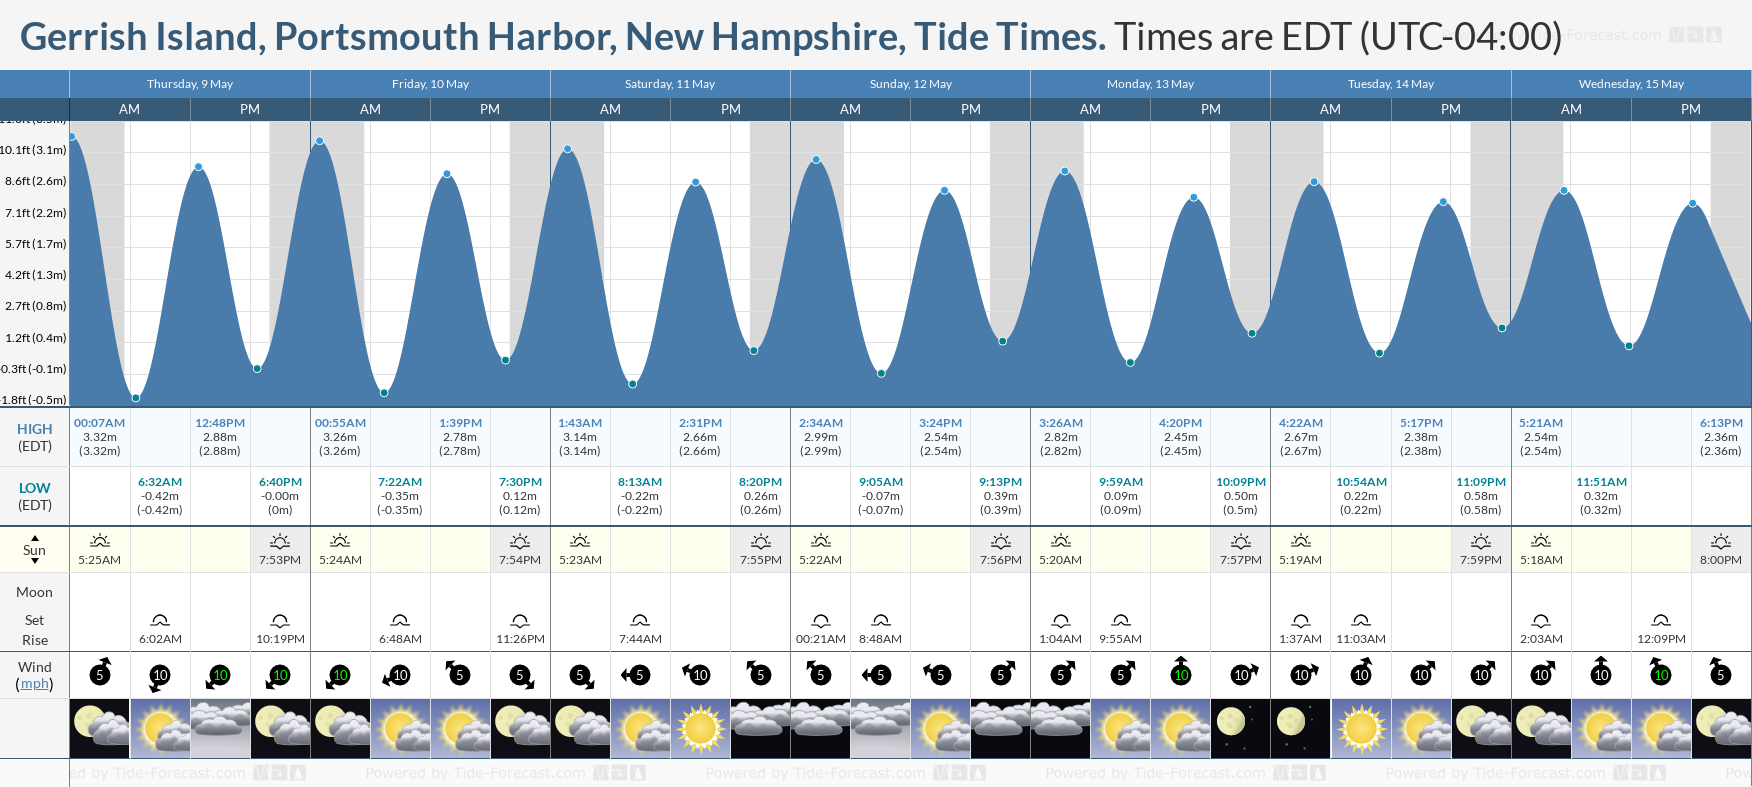 Gerrish Island, Portsmouth Harbor, New Hampshire Tide Chart including high and low tide tide times for the next 7 days